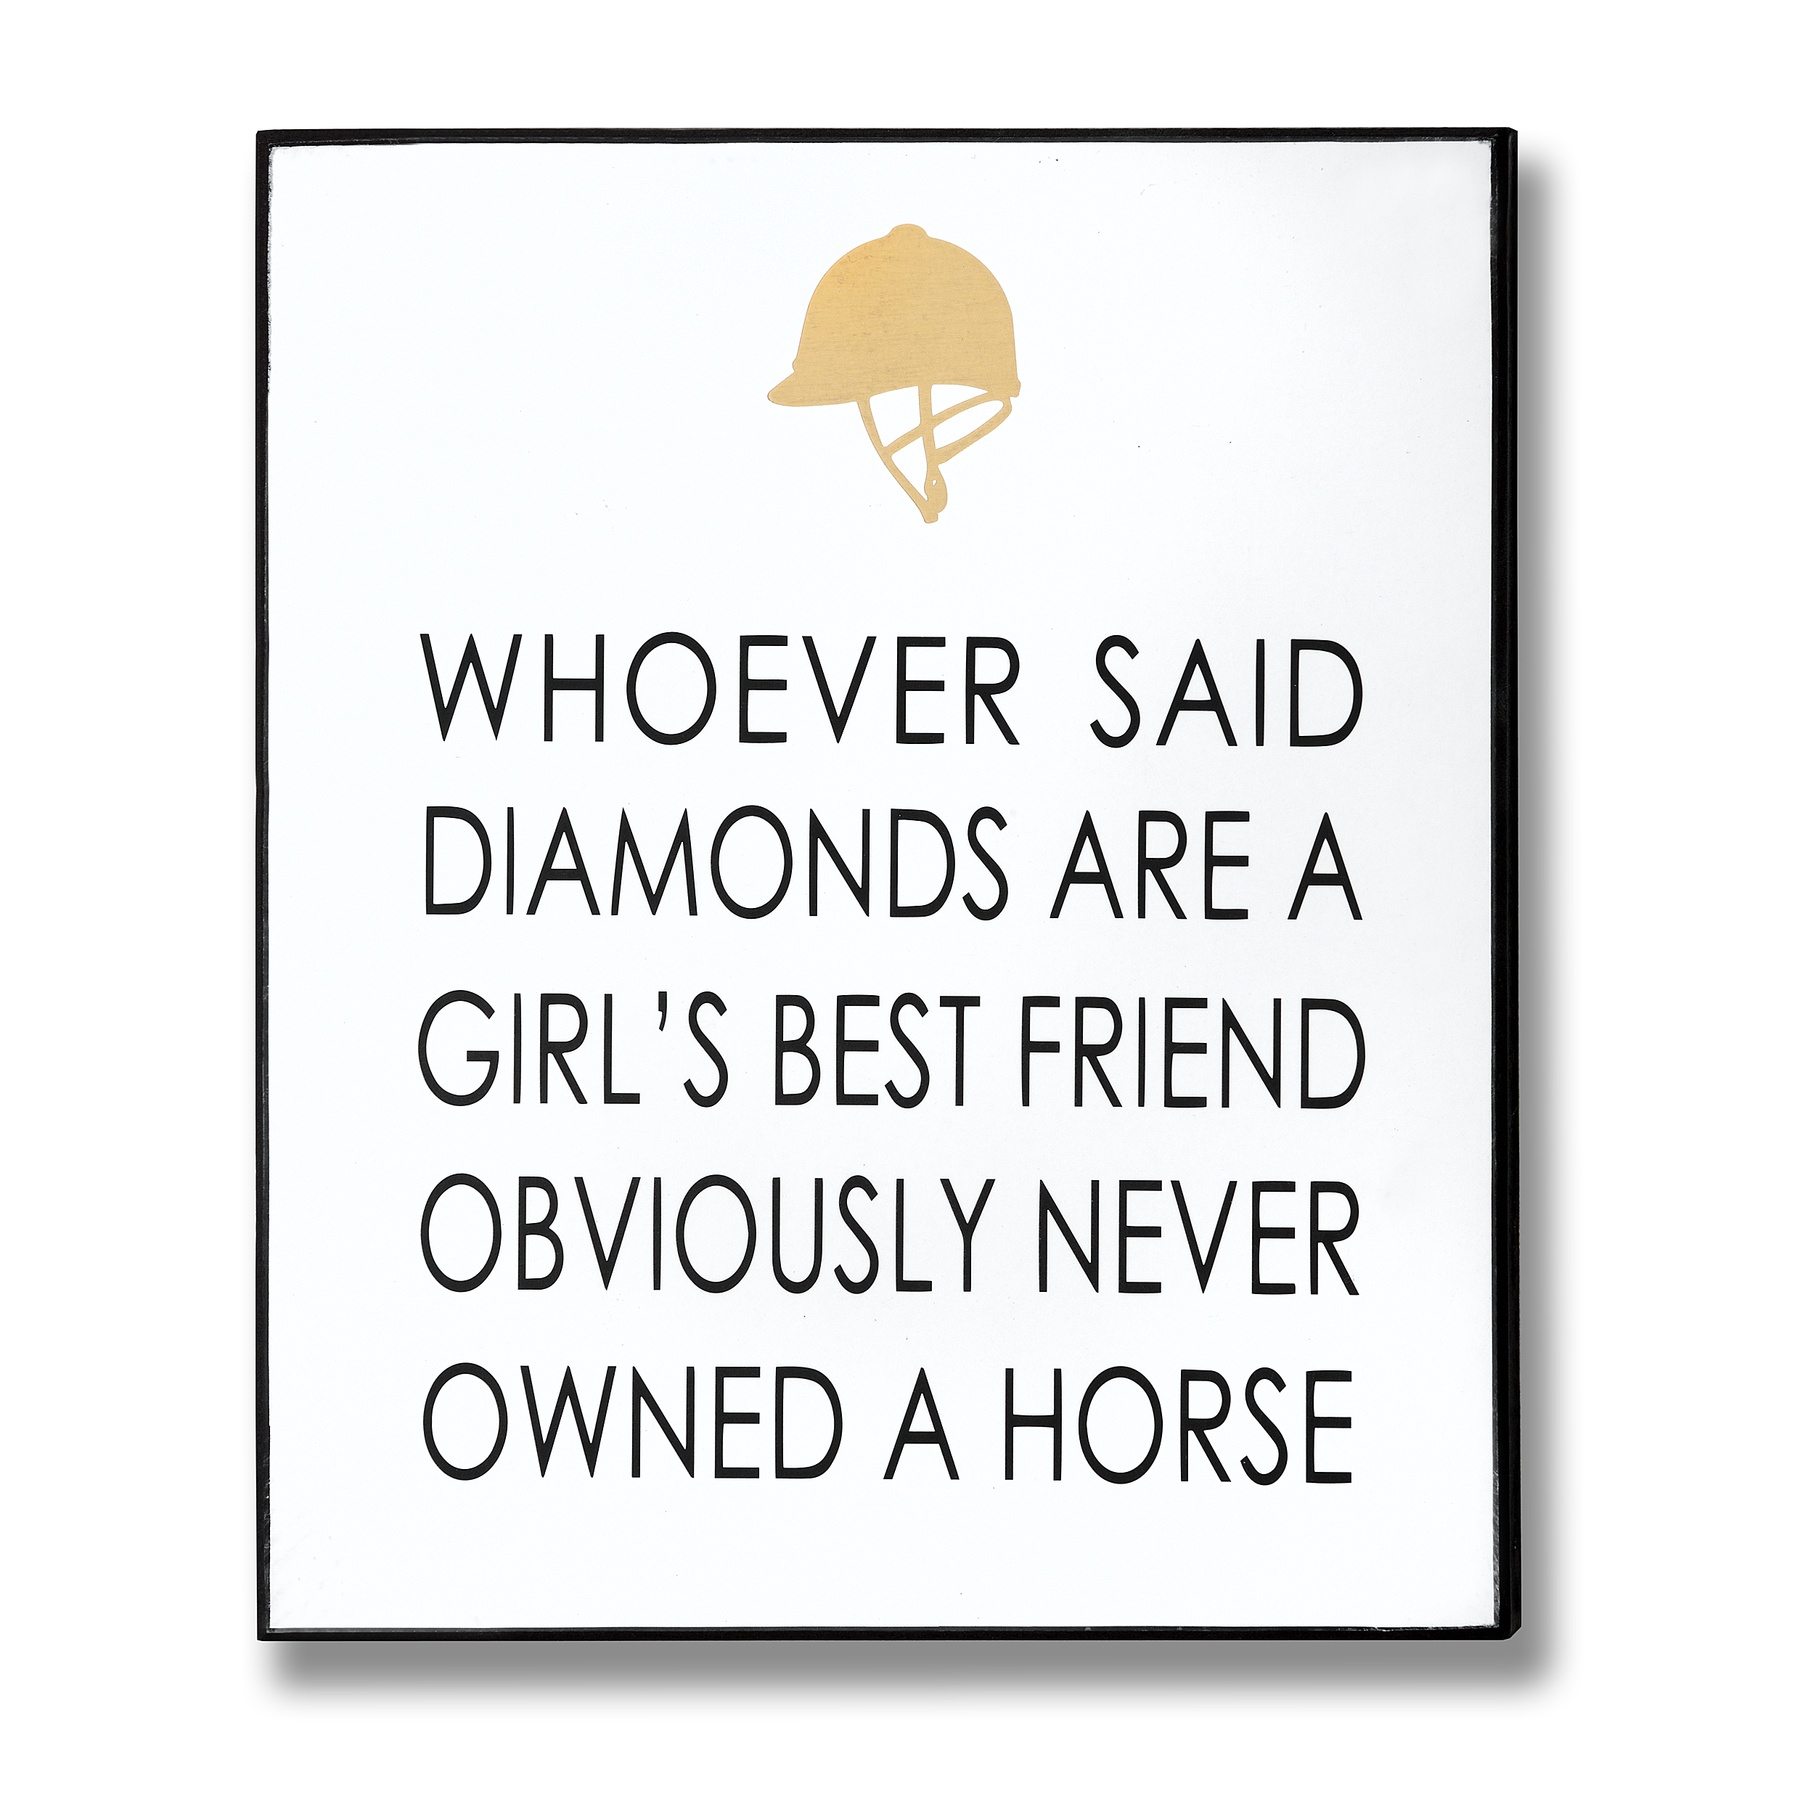 Owned A Horse Gold Foil Plaque - Image 1